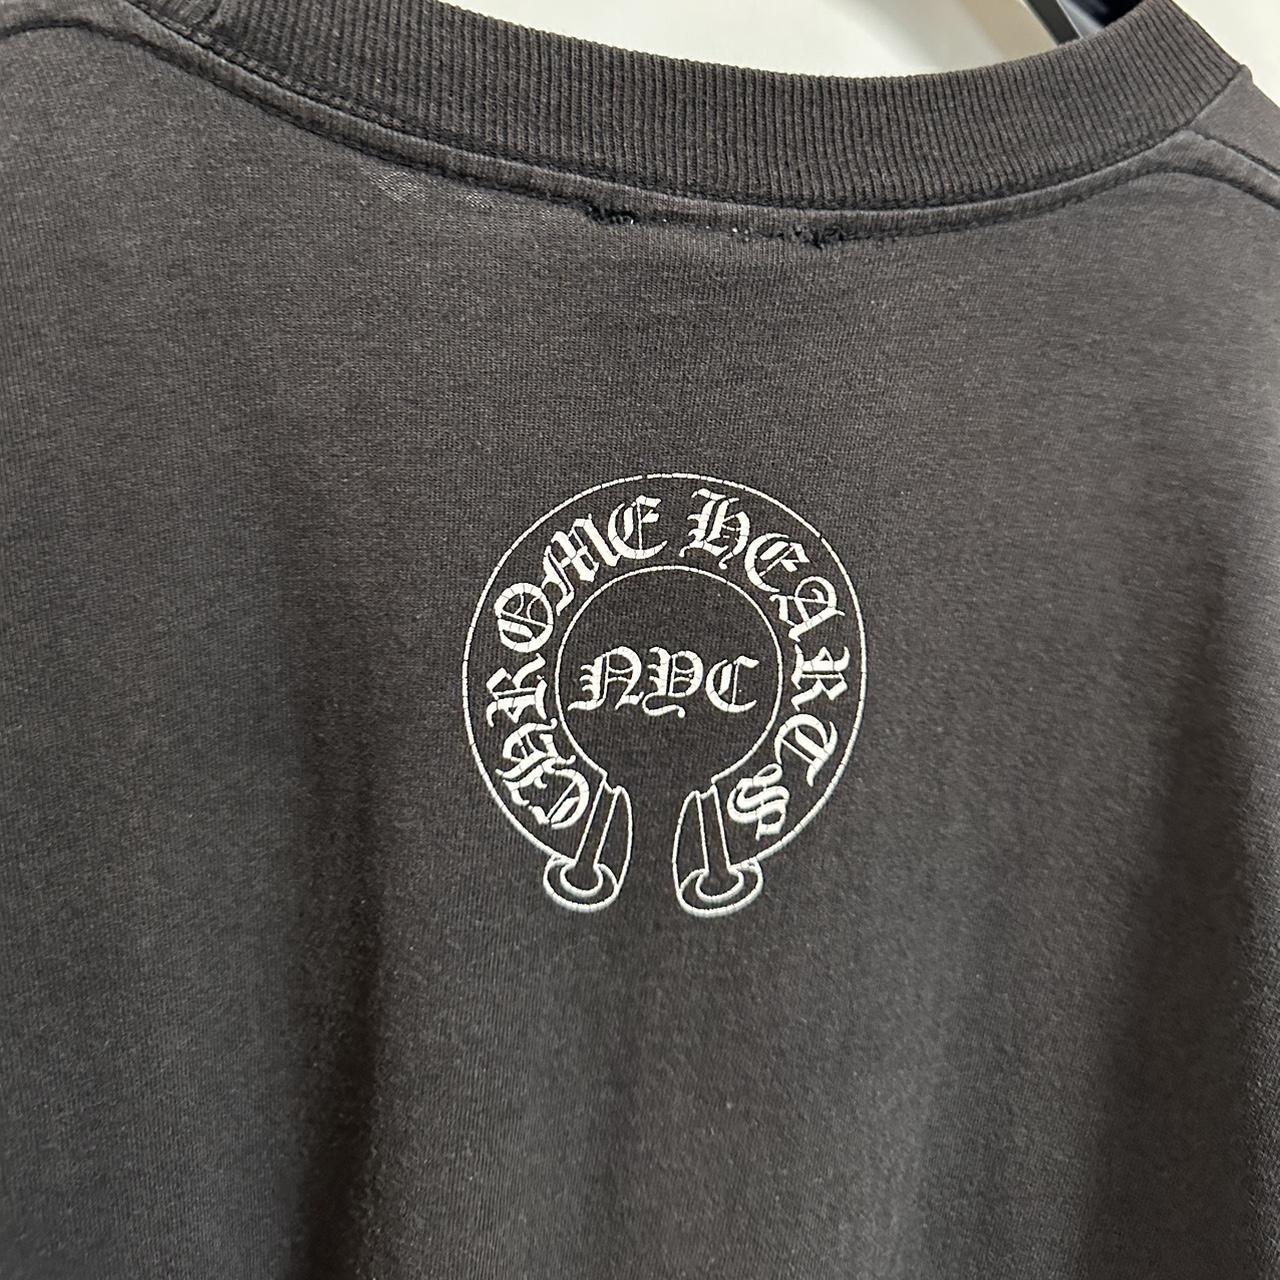 Chrome Hearts vintage washed black tee Bought from... - Depop